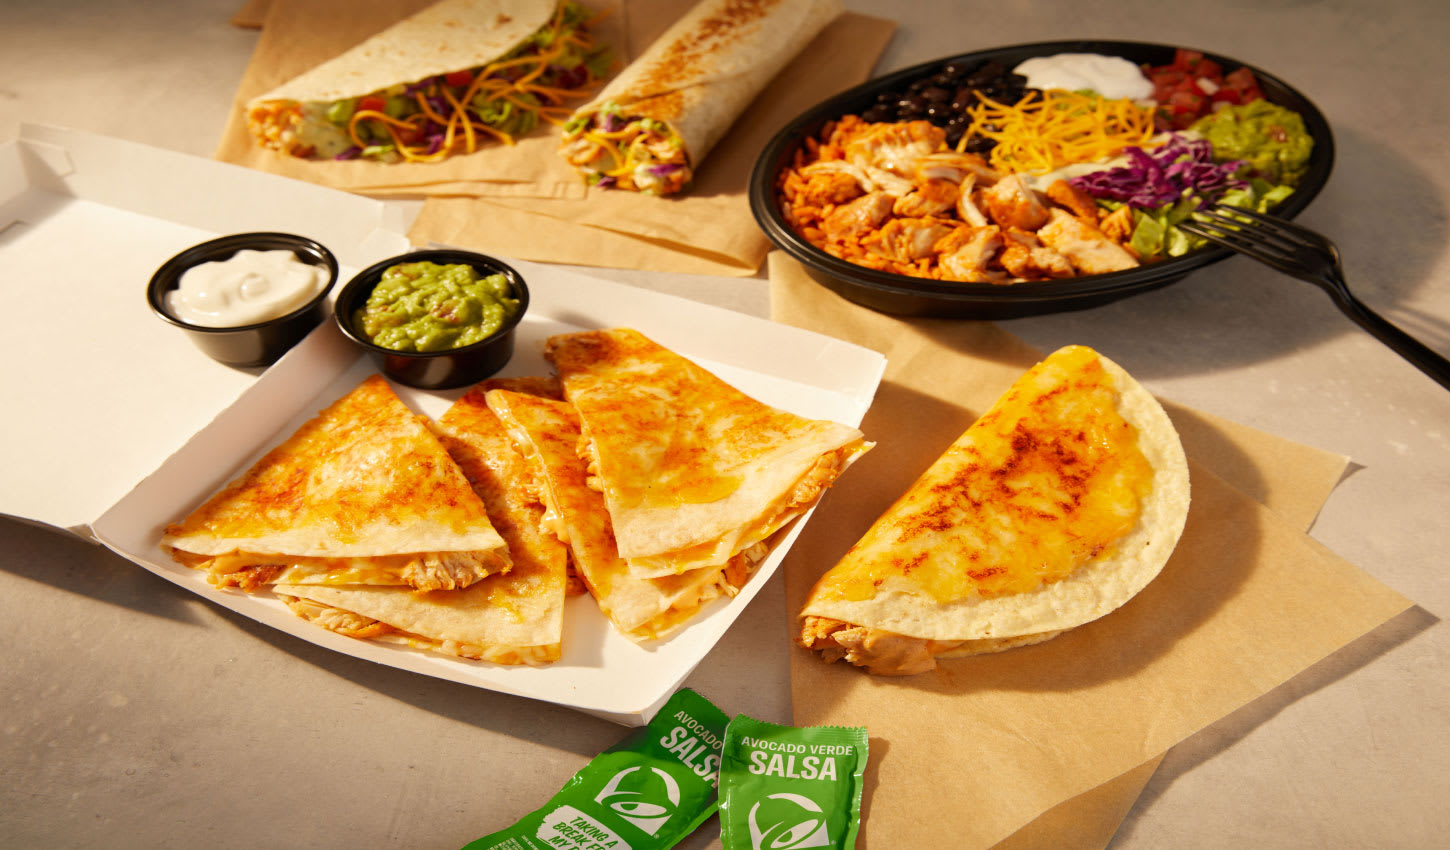 Taco Bell debuts 5 new menu items for chicken fans